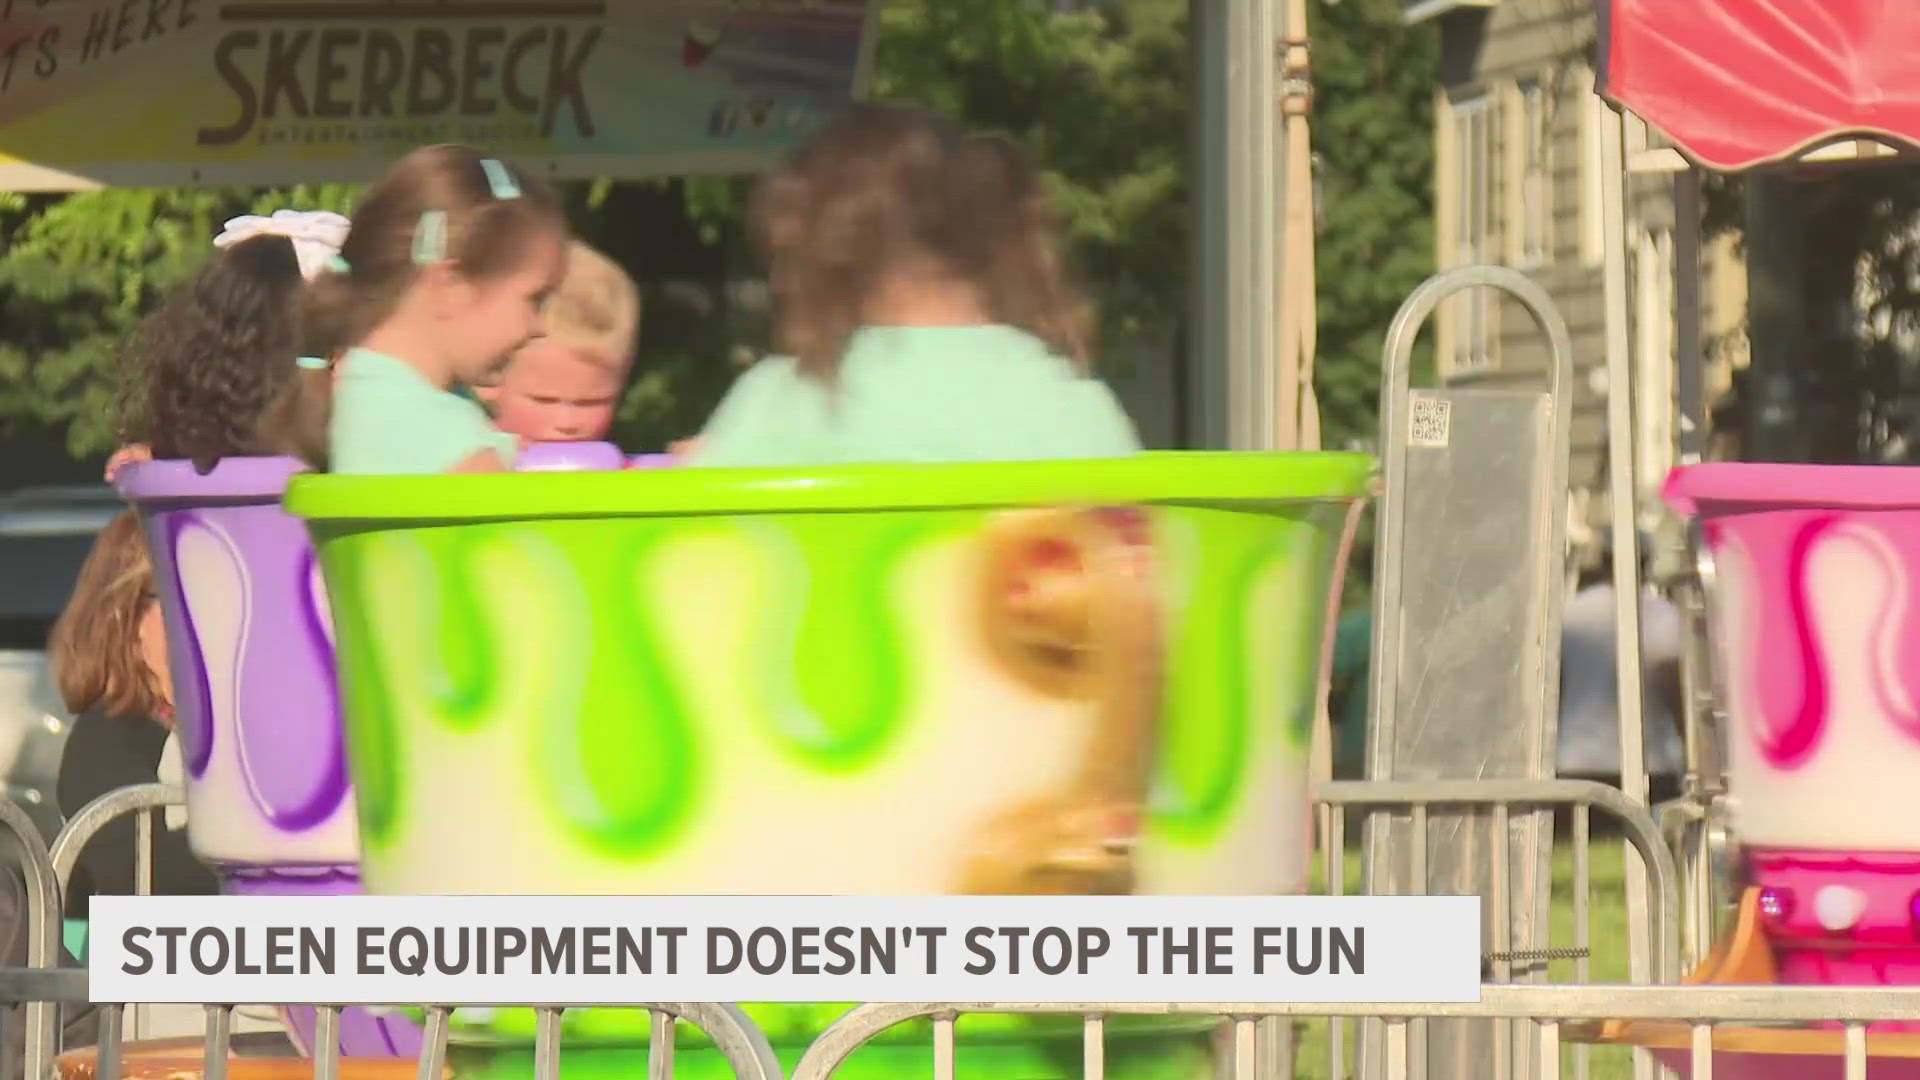 While organizers and attendees expressed disappointment that two rides were vandalized, it did not stop crowds from enjoying the annual festival.